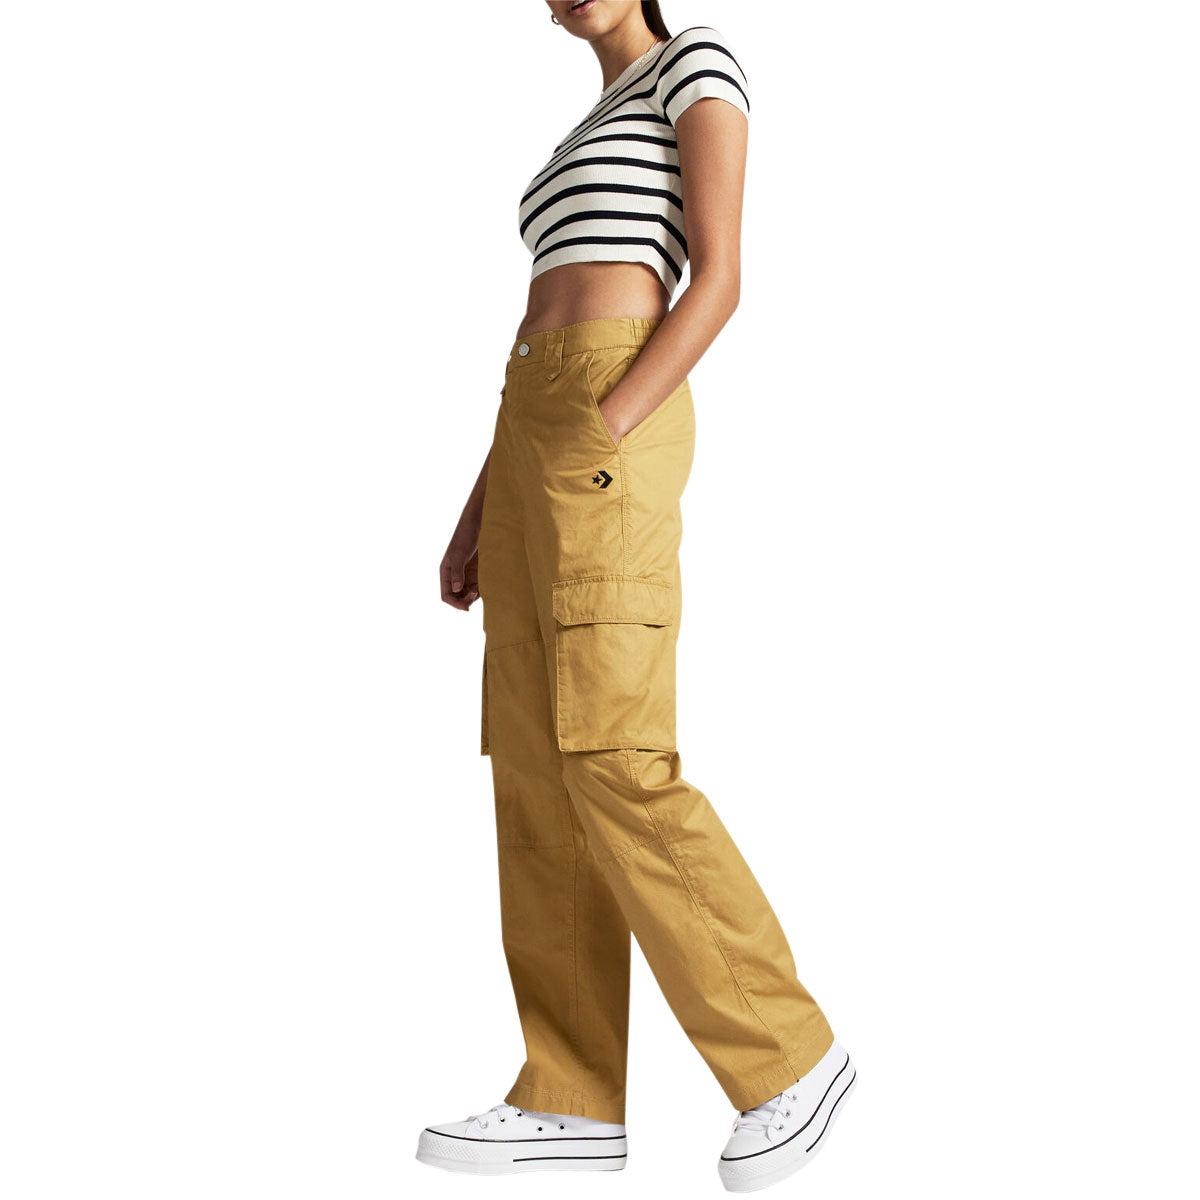 Converse Relaxed Cargo Pants - Dunescape image 5